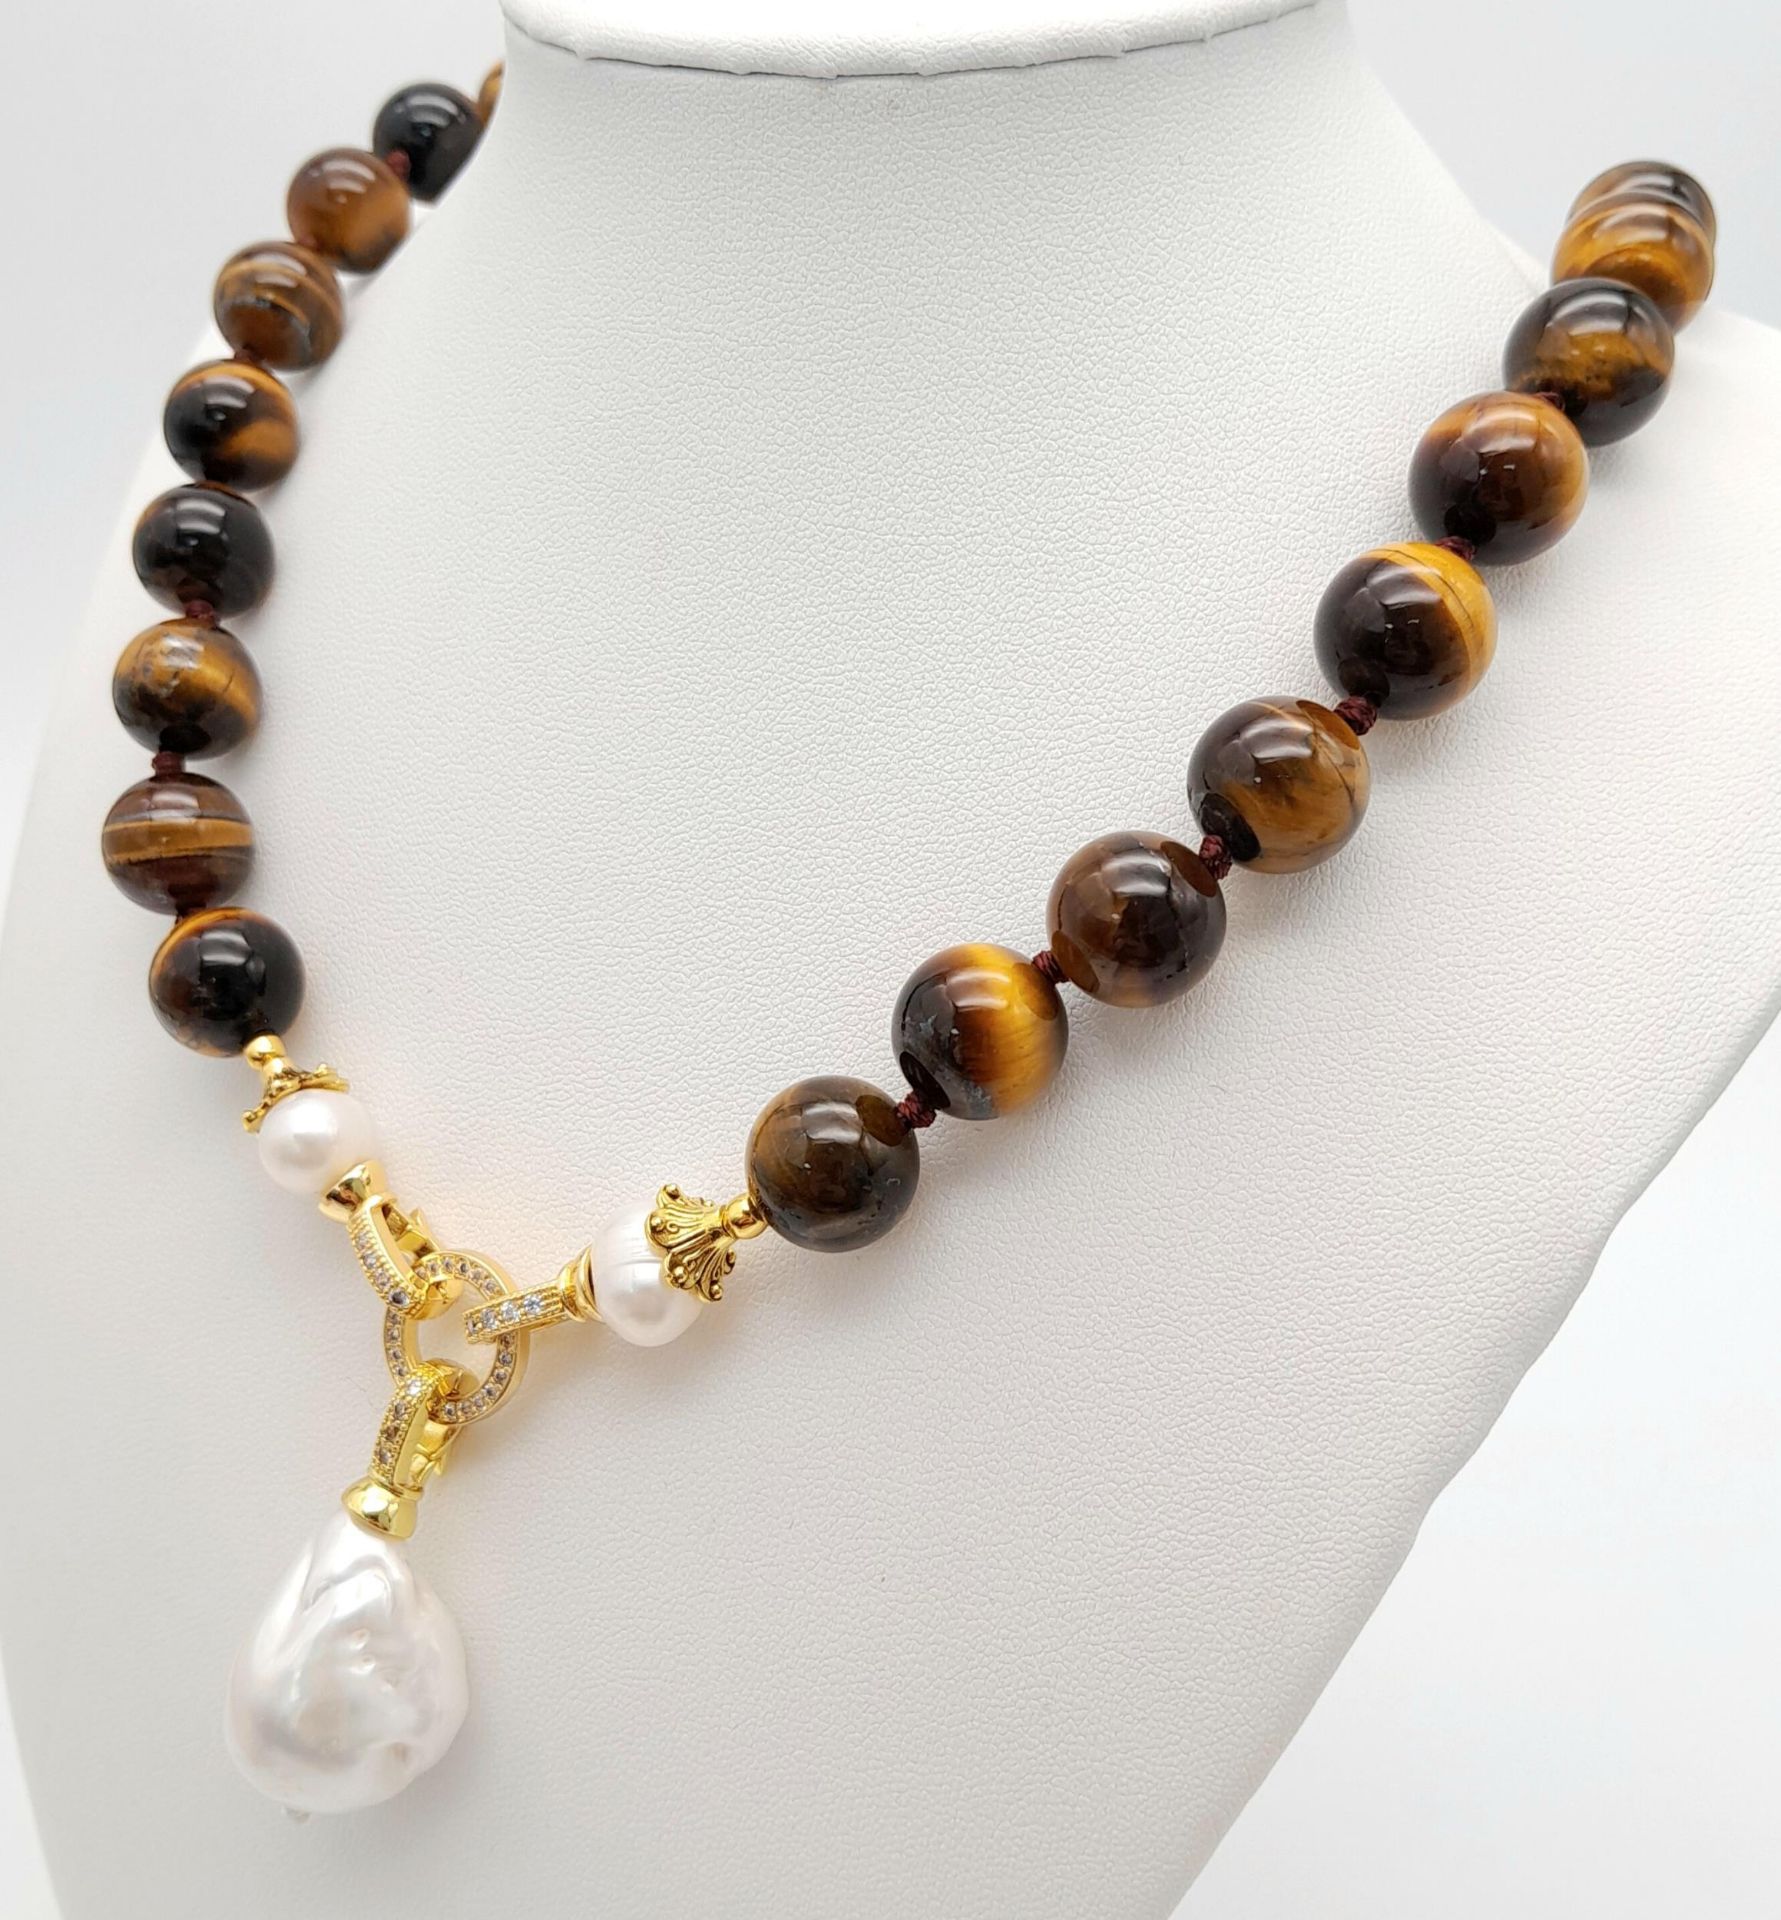 A Rich Tigers Eye Beaded Necklace with a Hanging Keisha Baroque Pearl Pendant. 12mm beads. - Bild 2 aus 4